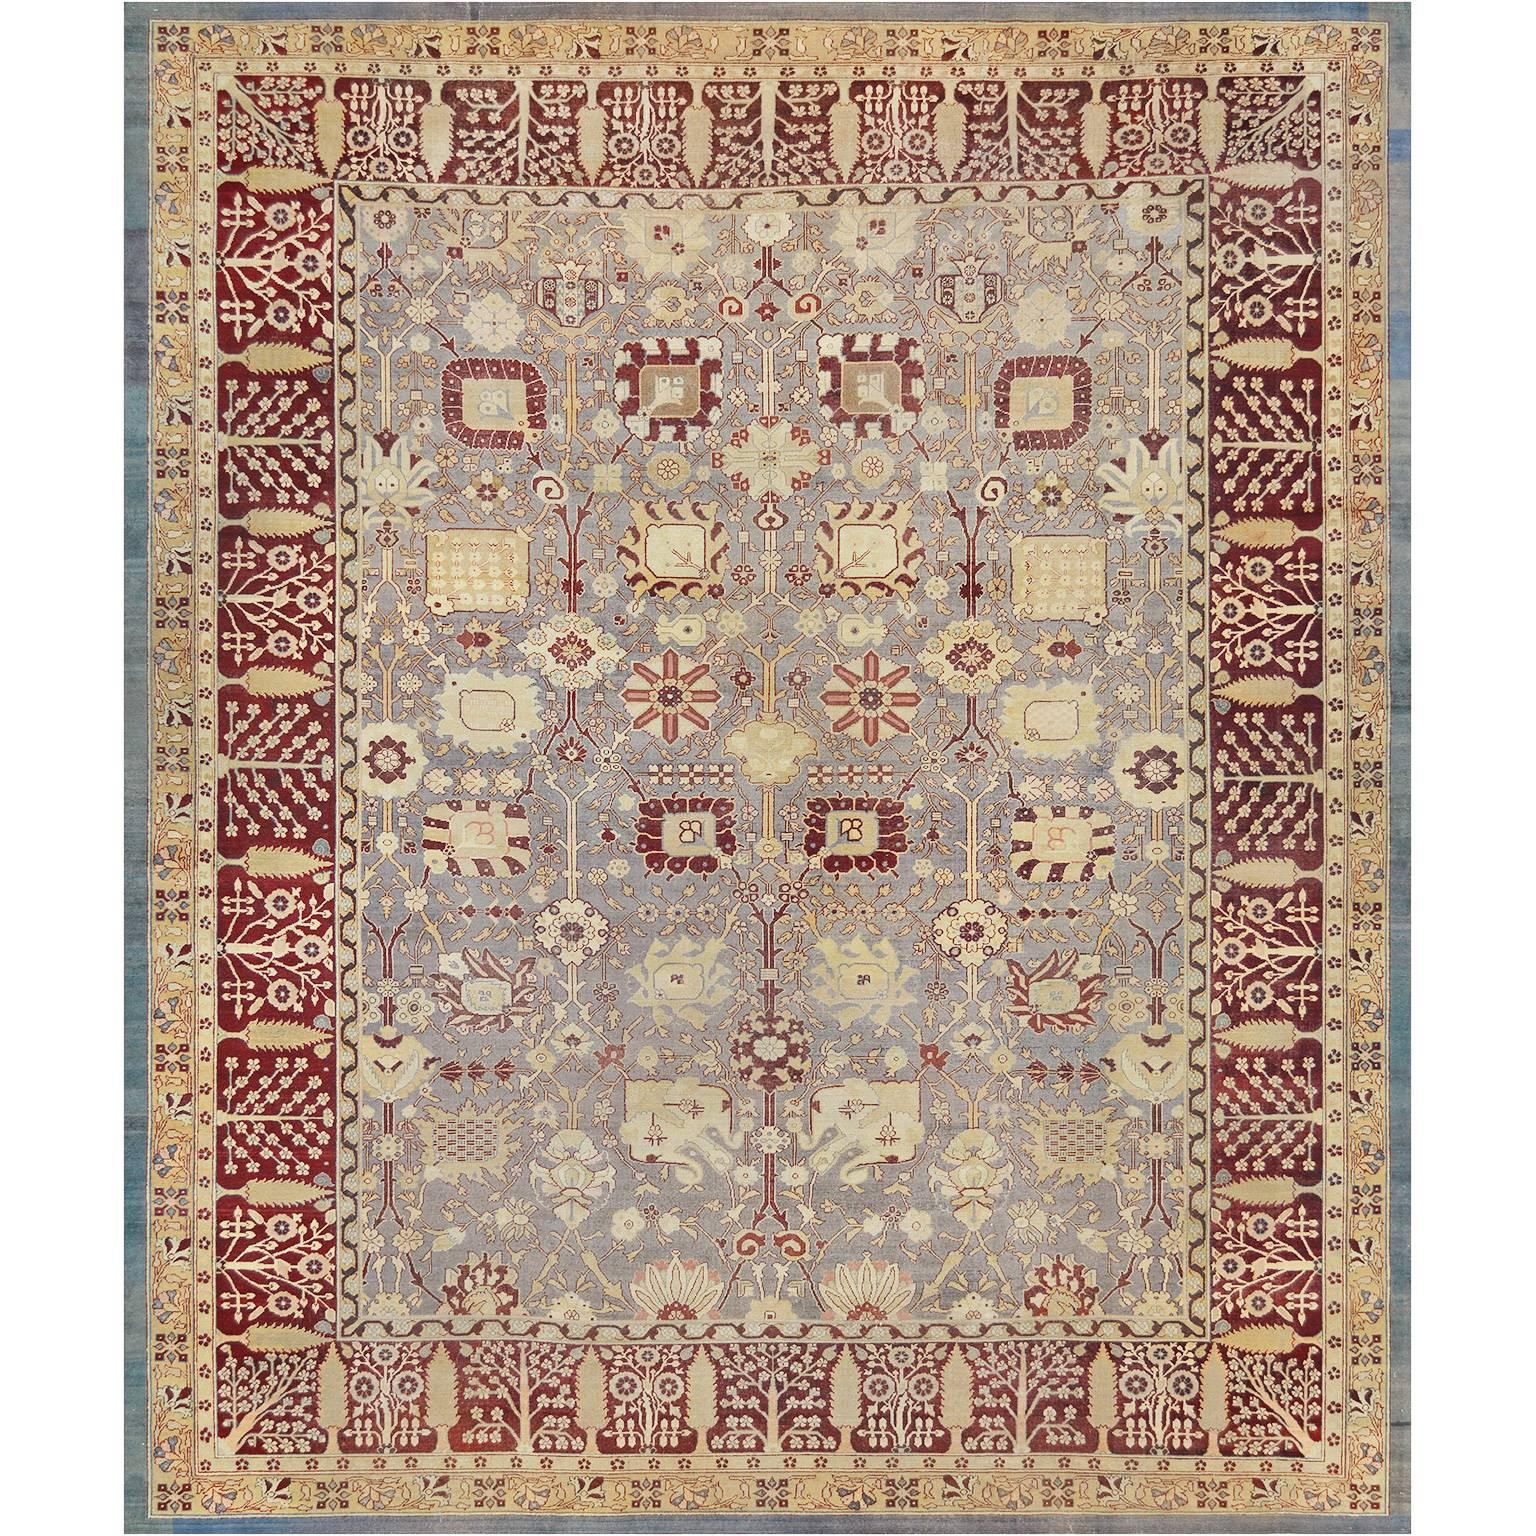 This traditional handwoven Indian Agra rug has a shaded slate field with overall counterposed design of elegant palmettes issuing scrolling angled floral vines, in a regal burgundy red border of cypress trees and flowering plants, between ornate